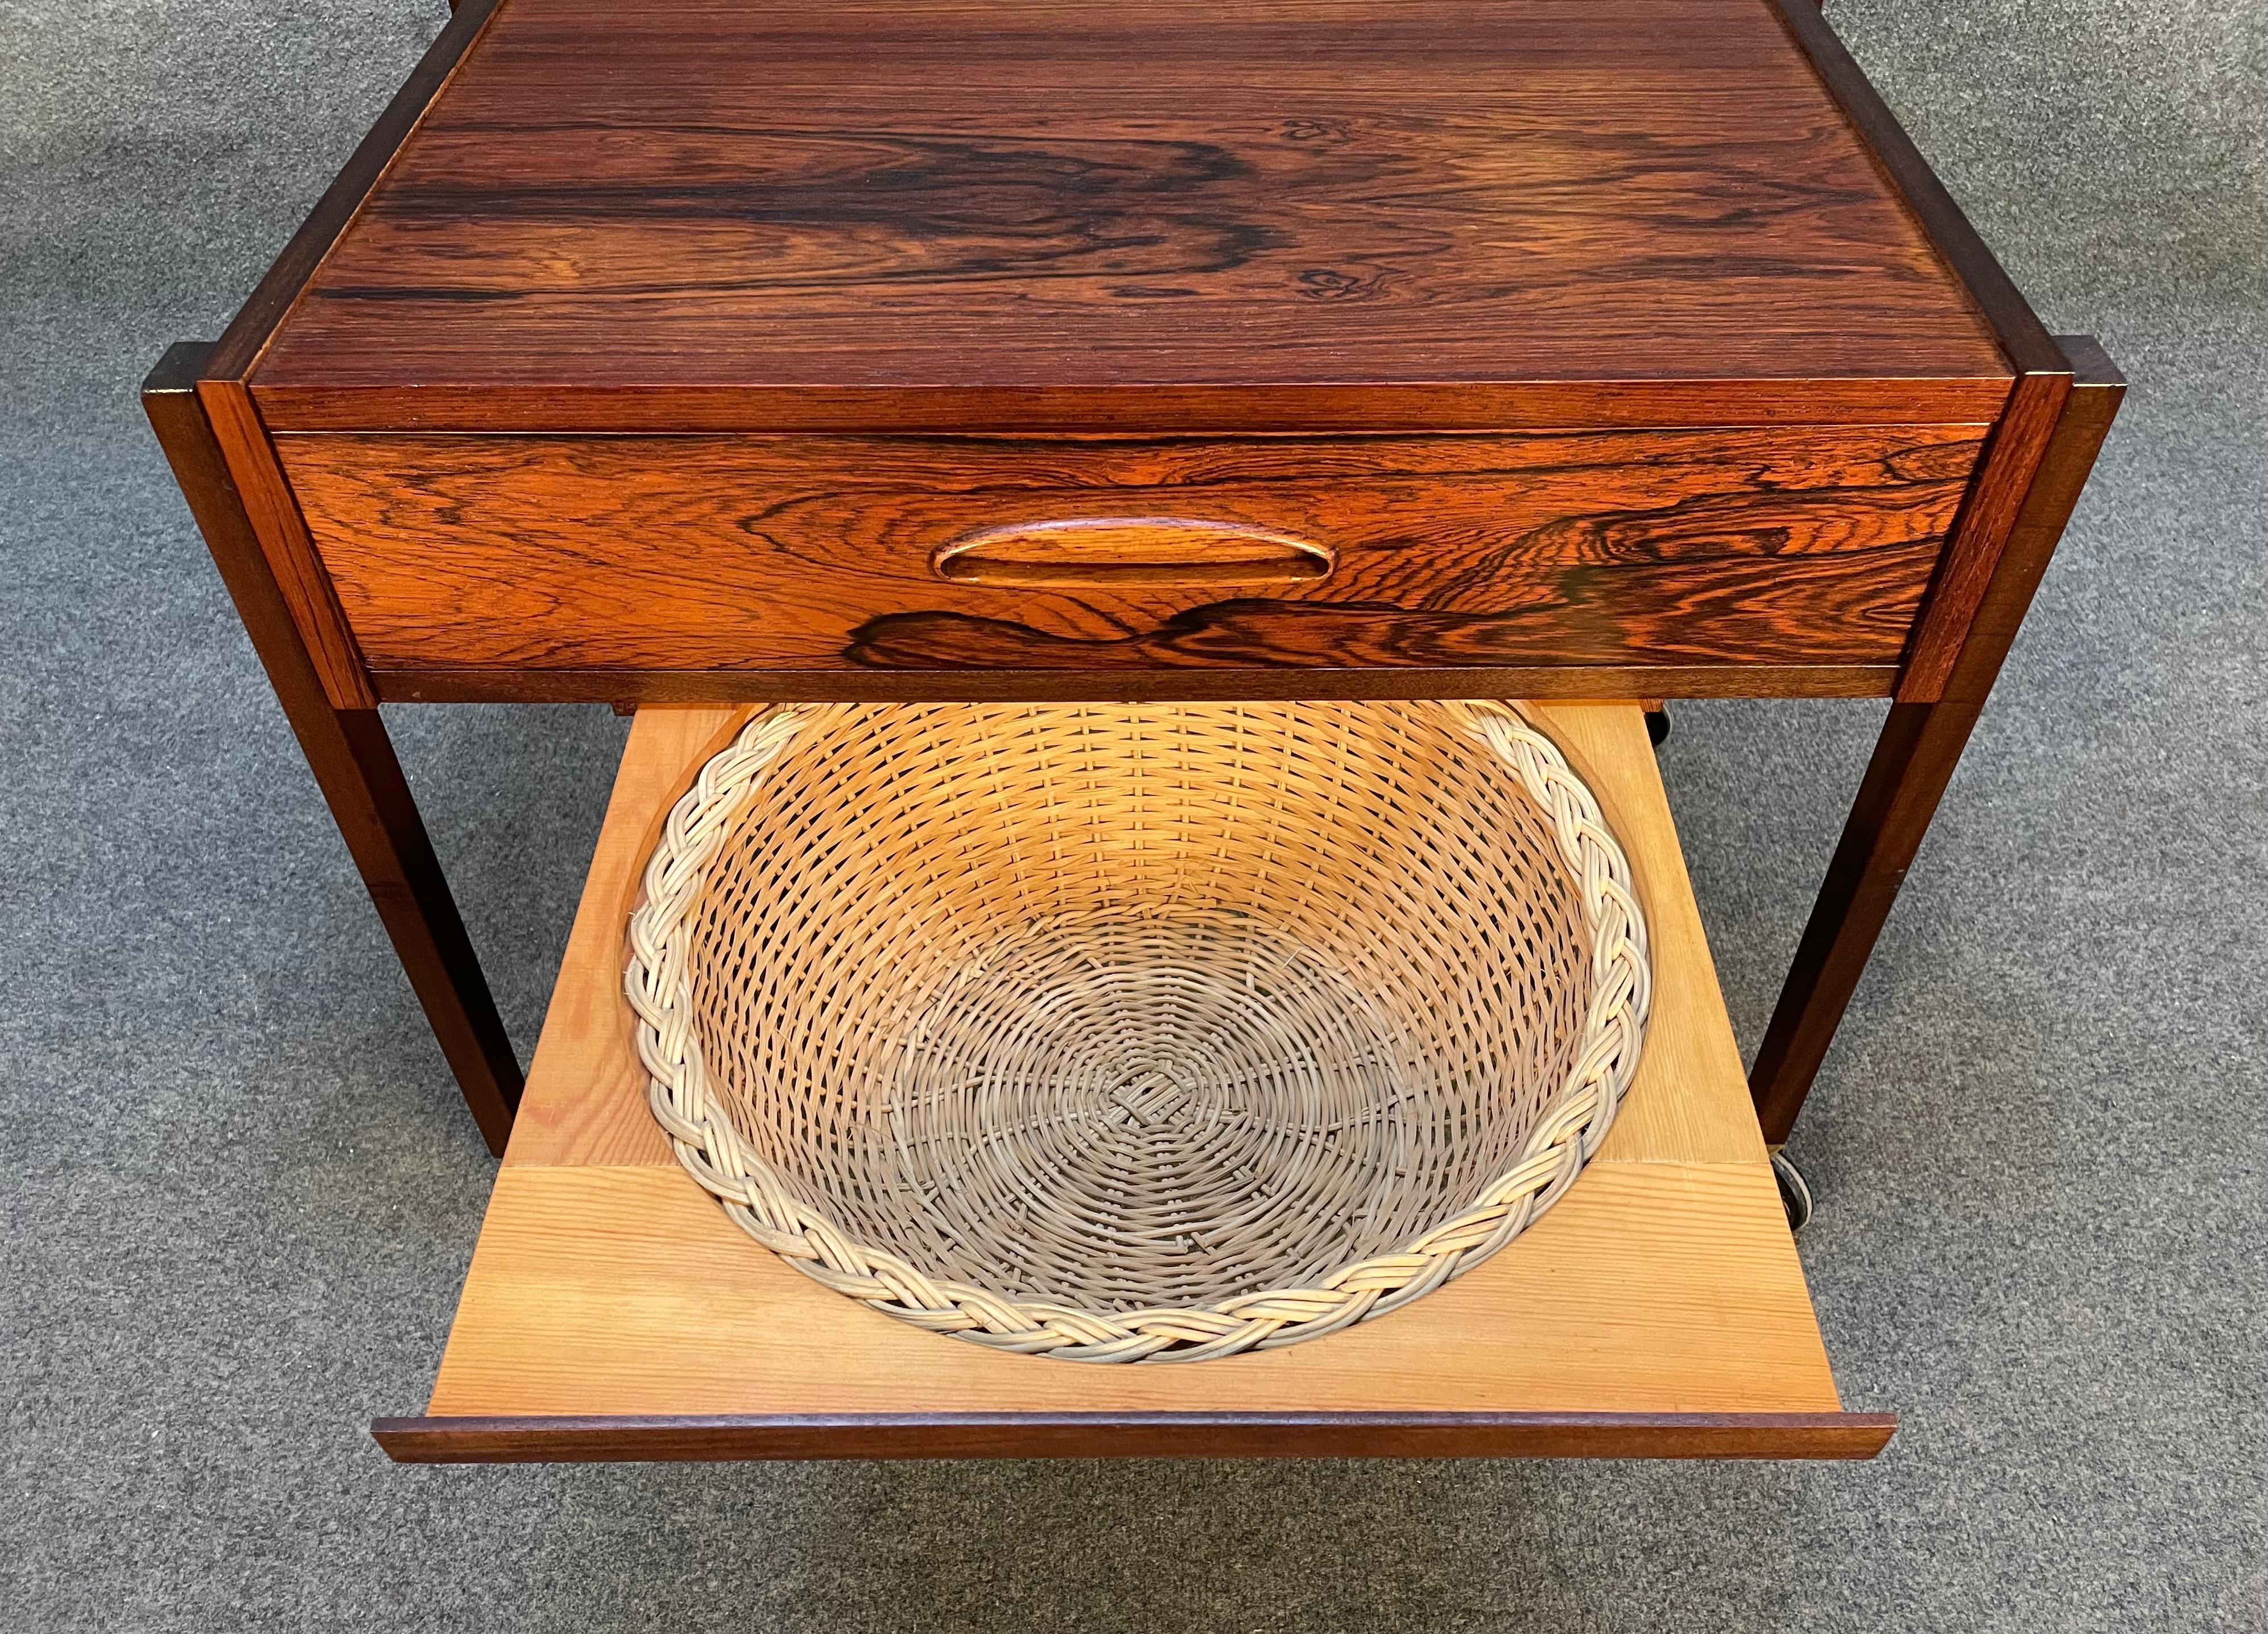 Here is a beautiful Scandinavian modern sewing cart in Brazilian rosewood manufactured in Denmark in the 1960's recently imported to California before its refinishing.
This lovely piece features a vibrant wood grain, a single drawer with a recessed